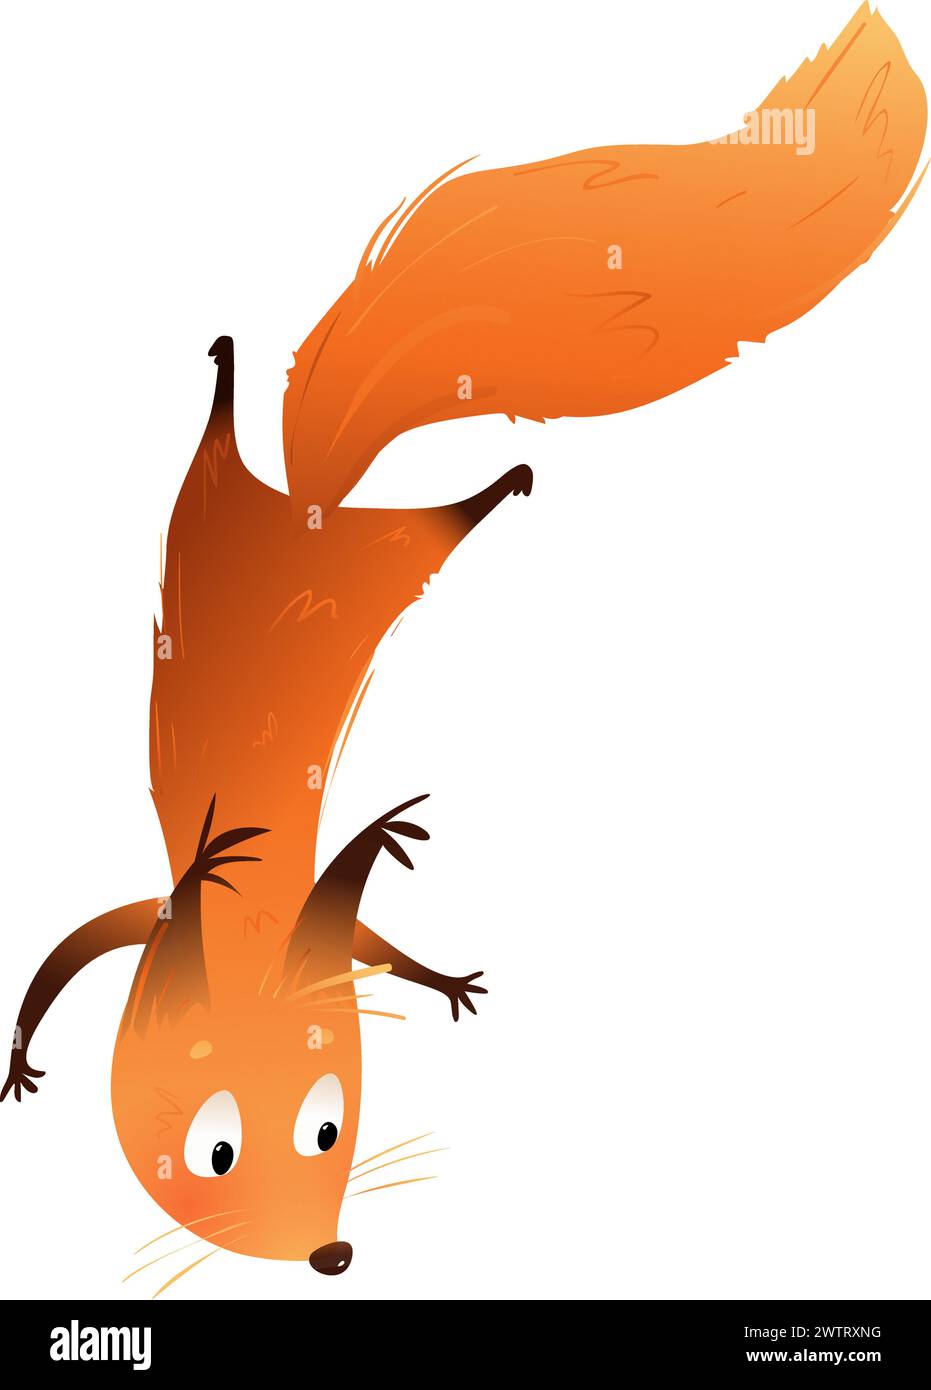 Flying Squirrel Character Animal for Kids Illustrazione Vettoriale